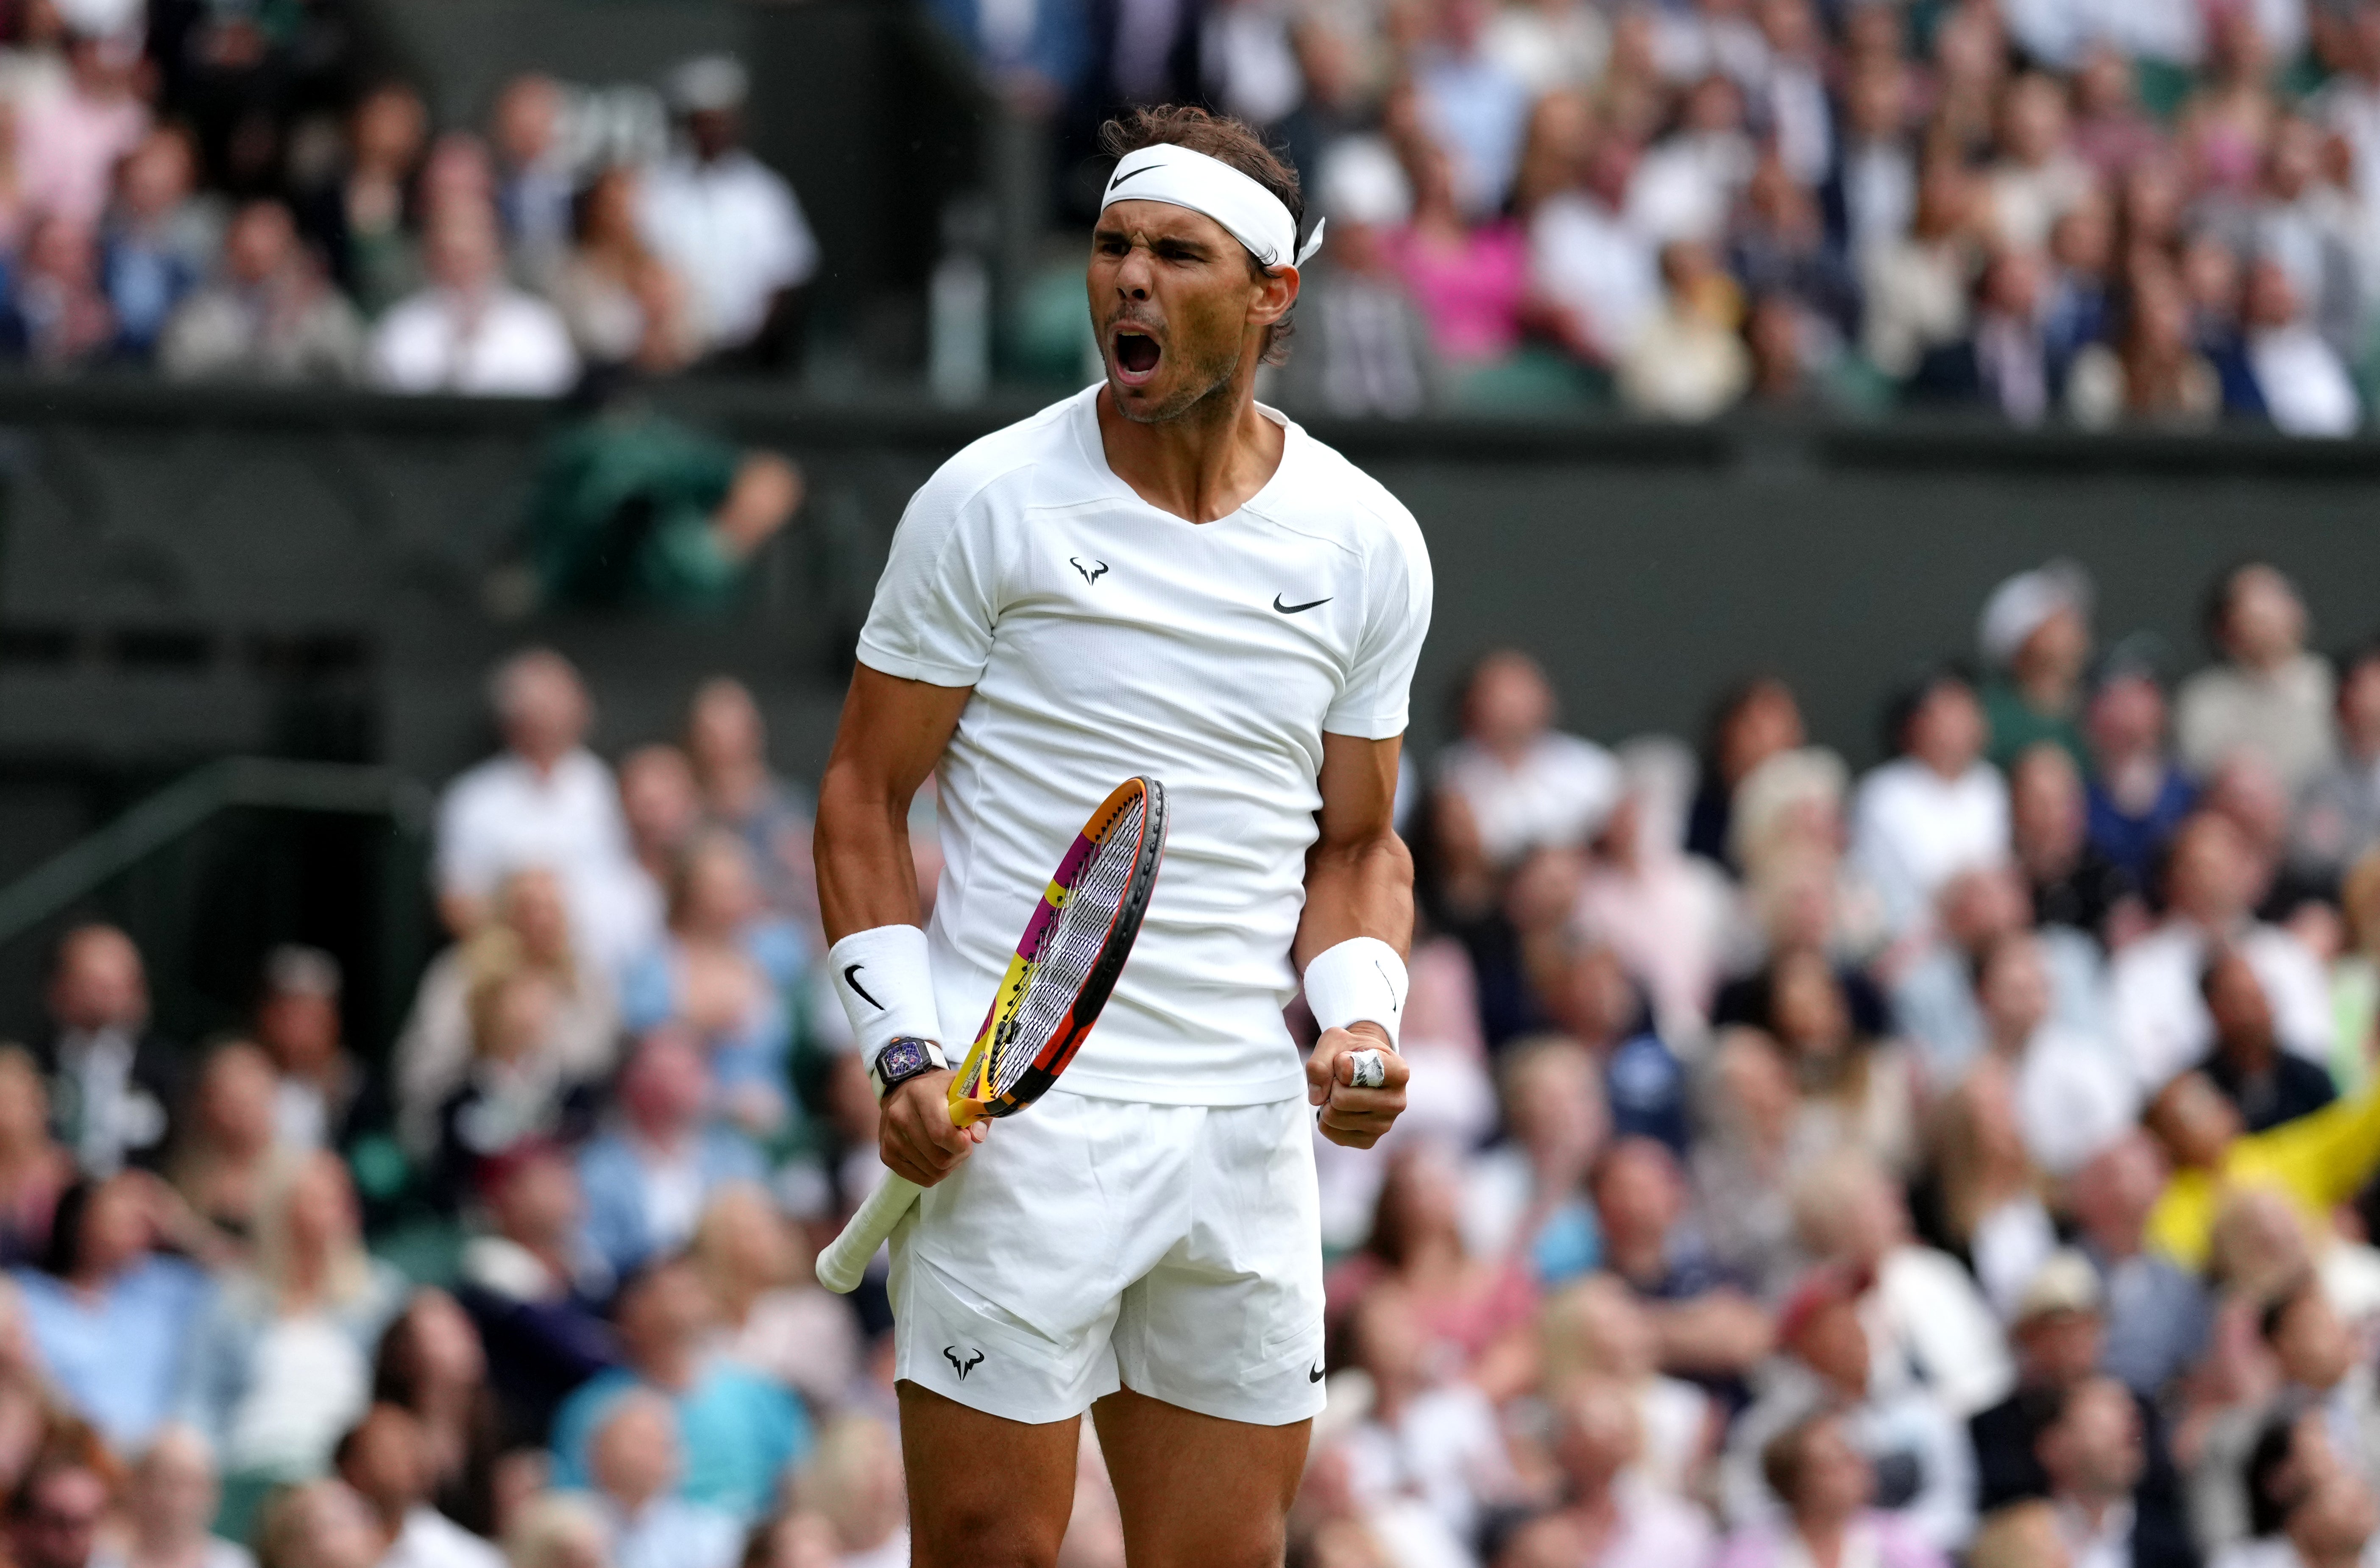 What time is Rafael Nadal playing at Wimbledon today? The Independent